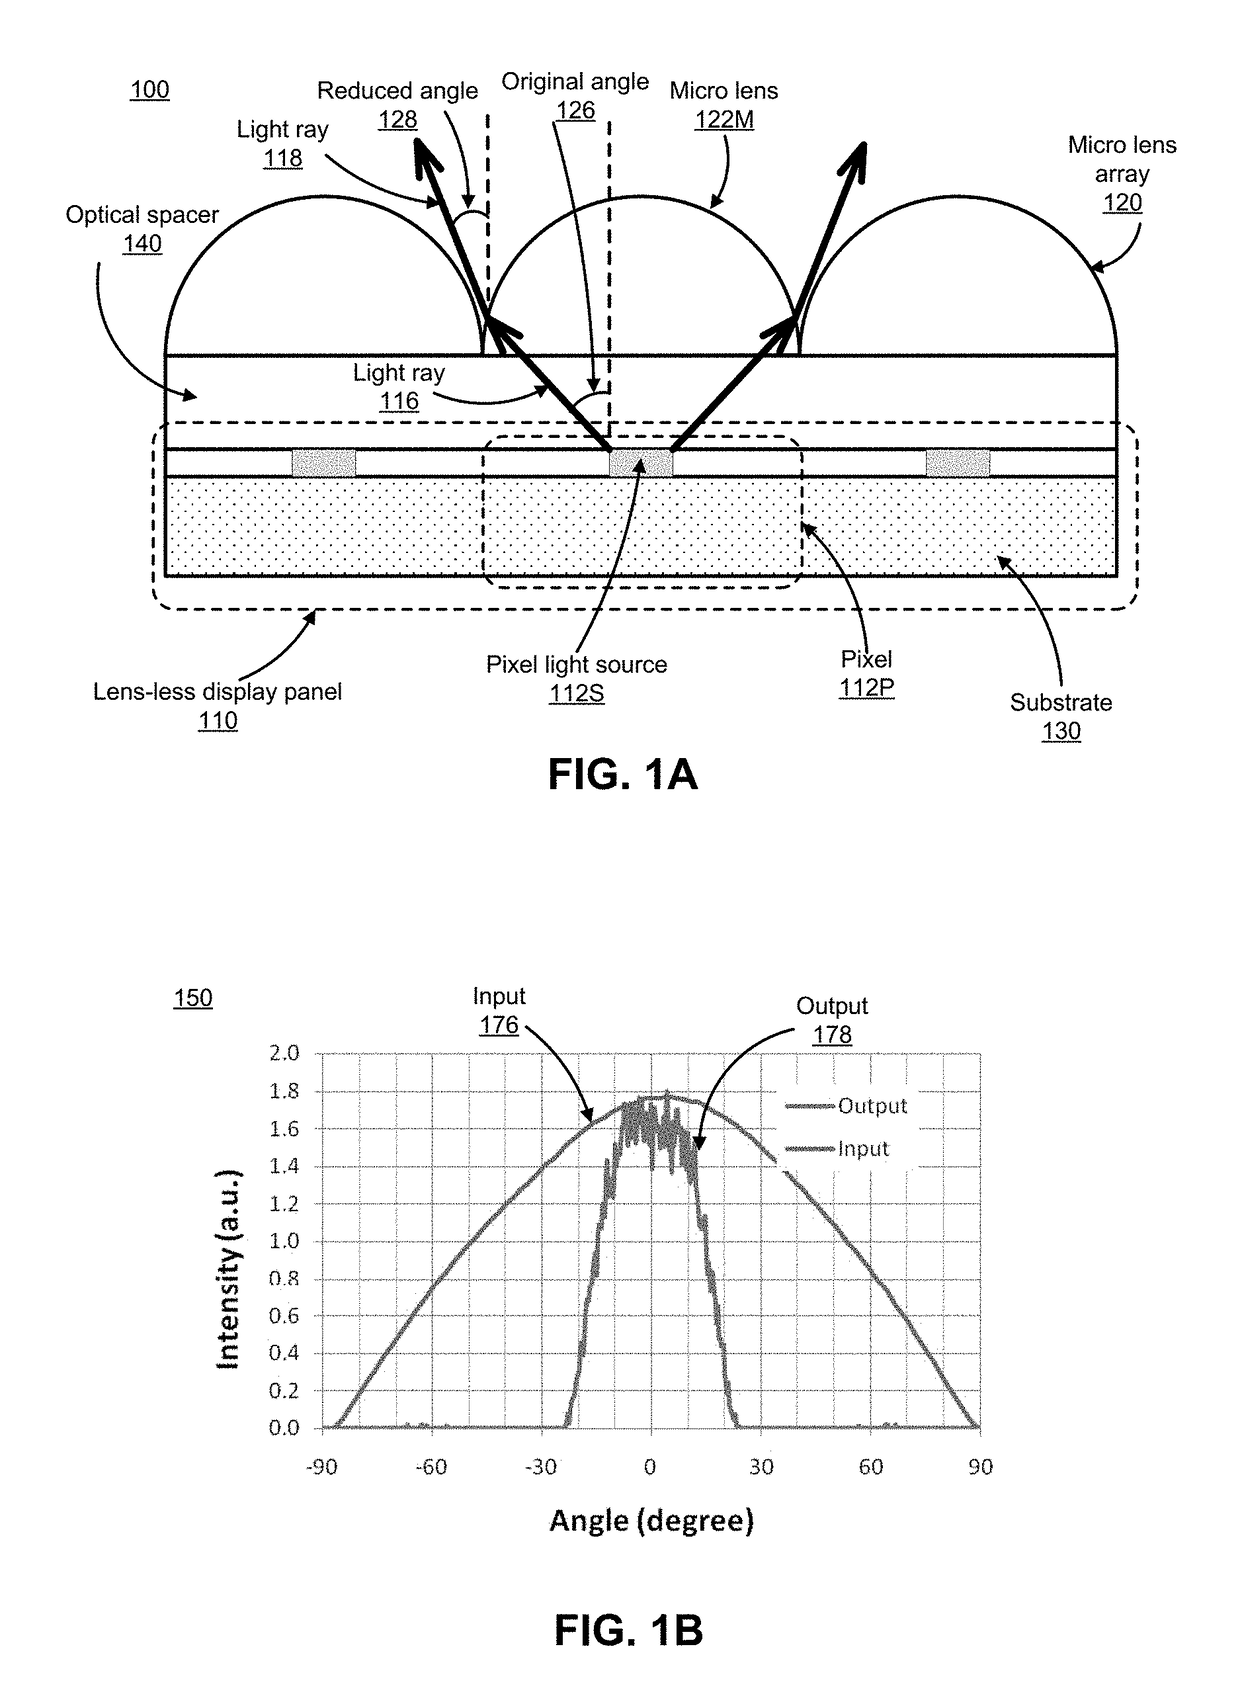 Manufacturing display panels with integrated micro lens array